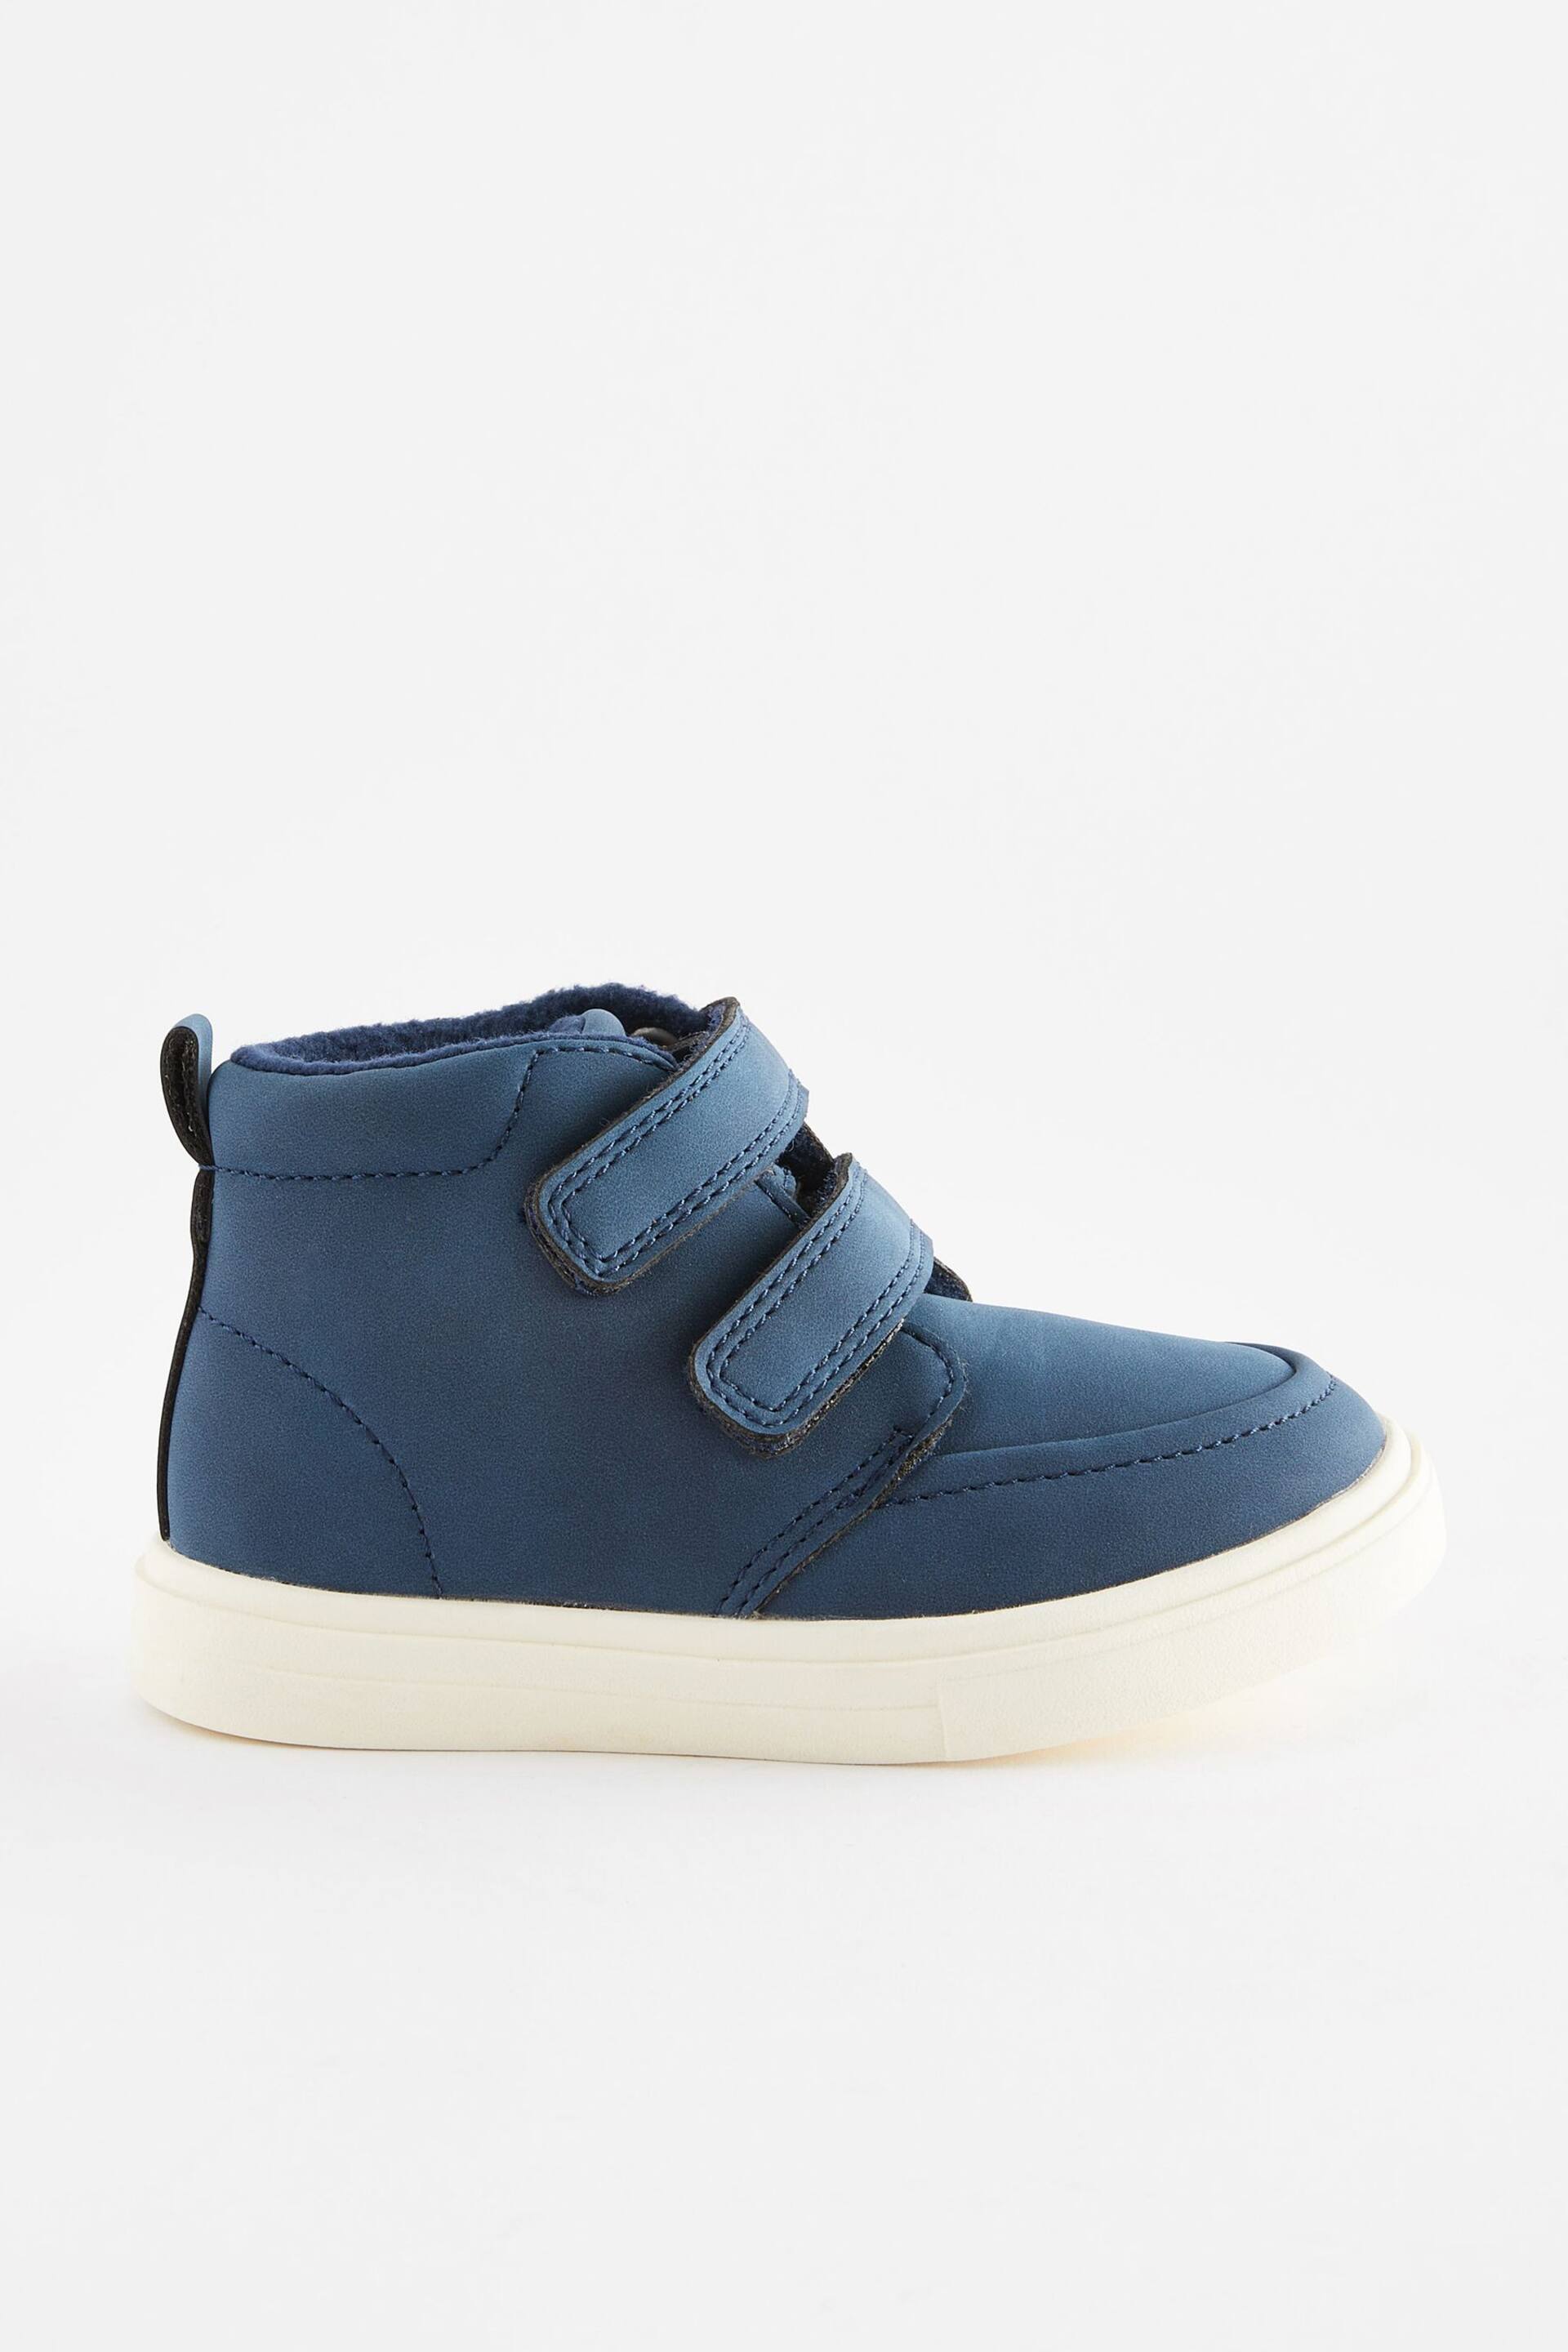 Navy Blue With Off White Sole Wide Fit (G) Warm Lined Touch Fastening Boots - Image 2 of 5